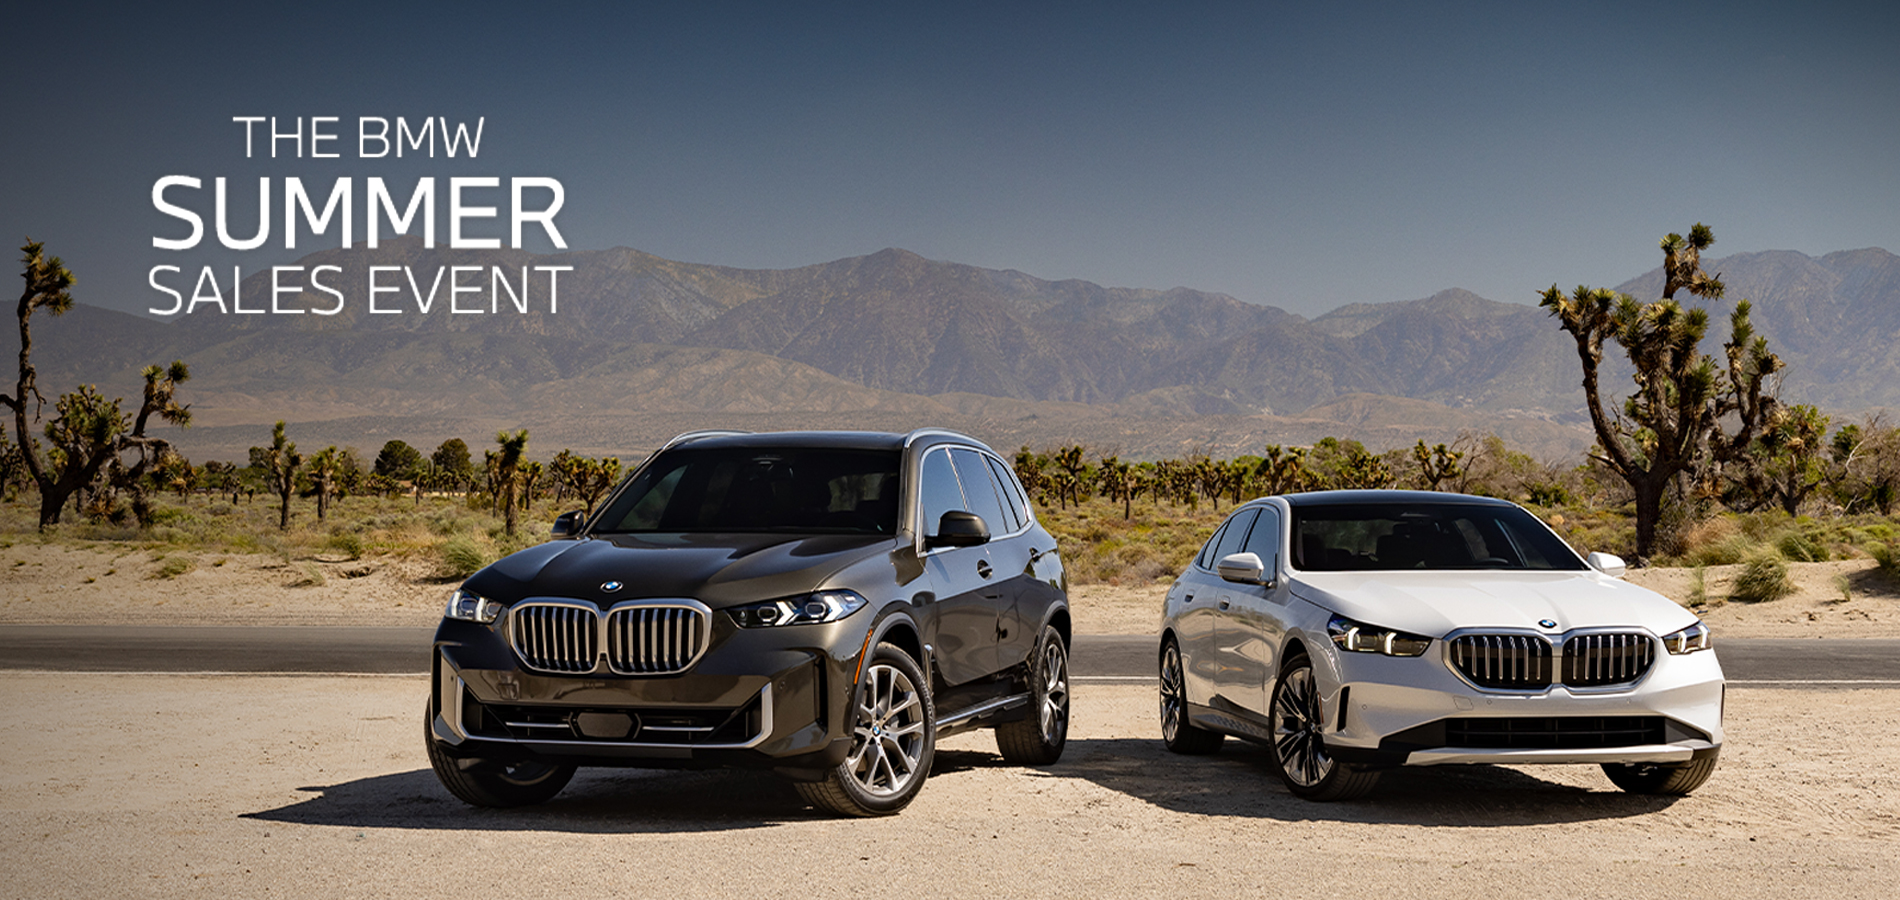 BMW X5 and 5 Series parked in desert landscape